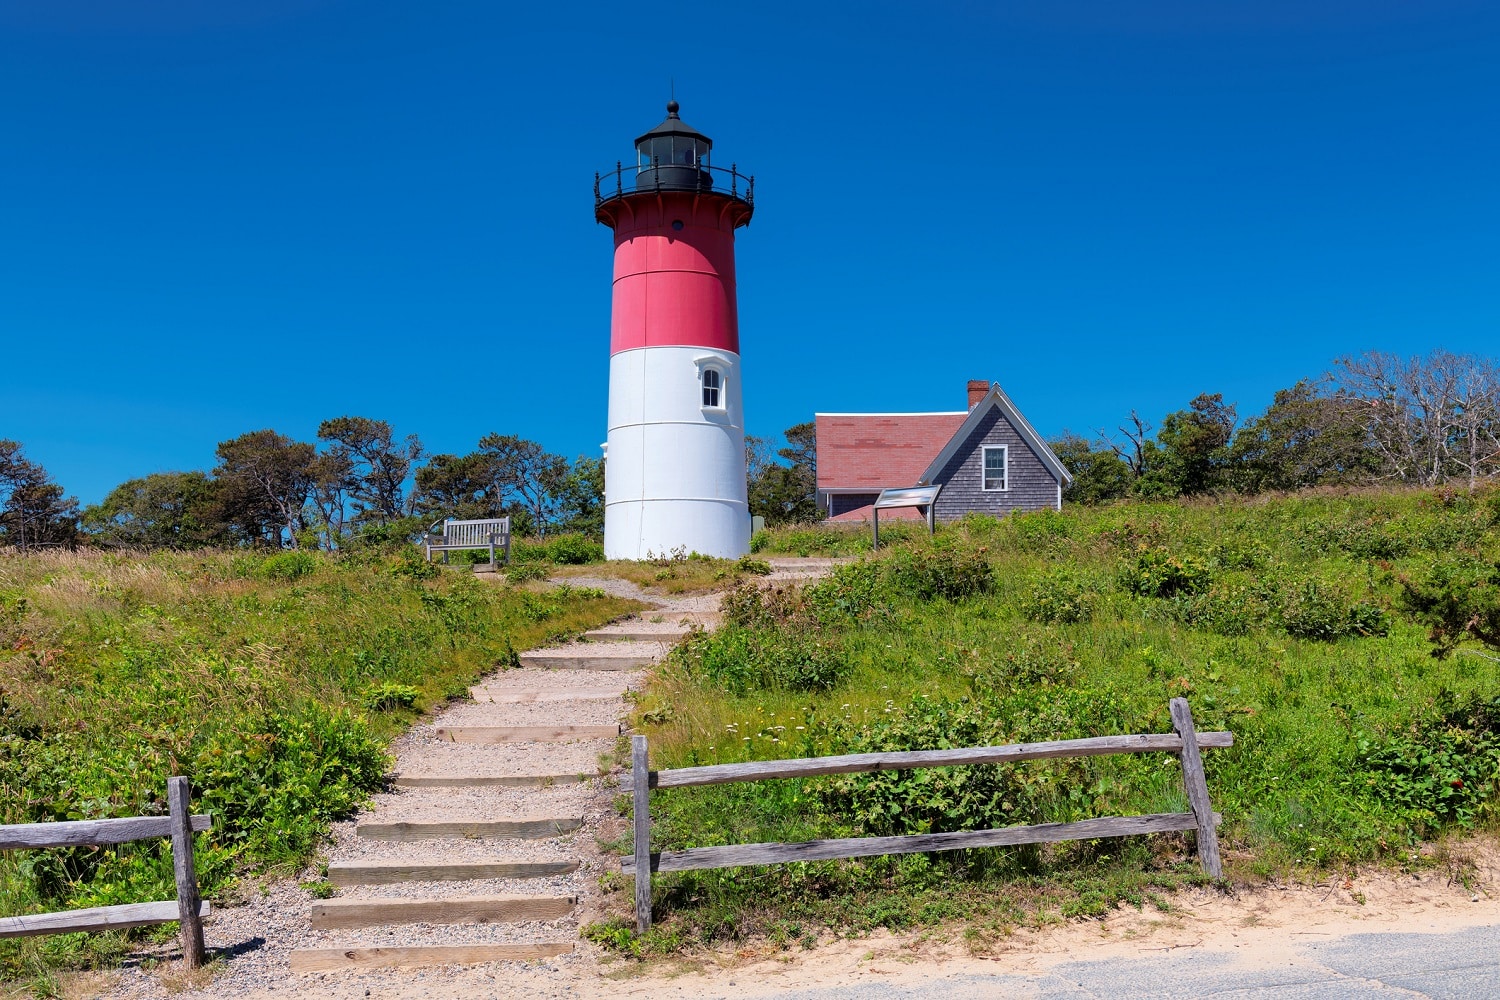 steps leading to a red, white and black lighthouse against a blue sky